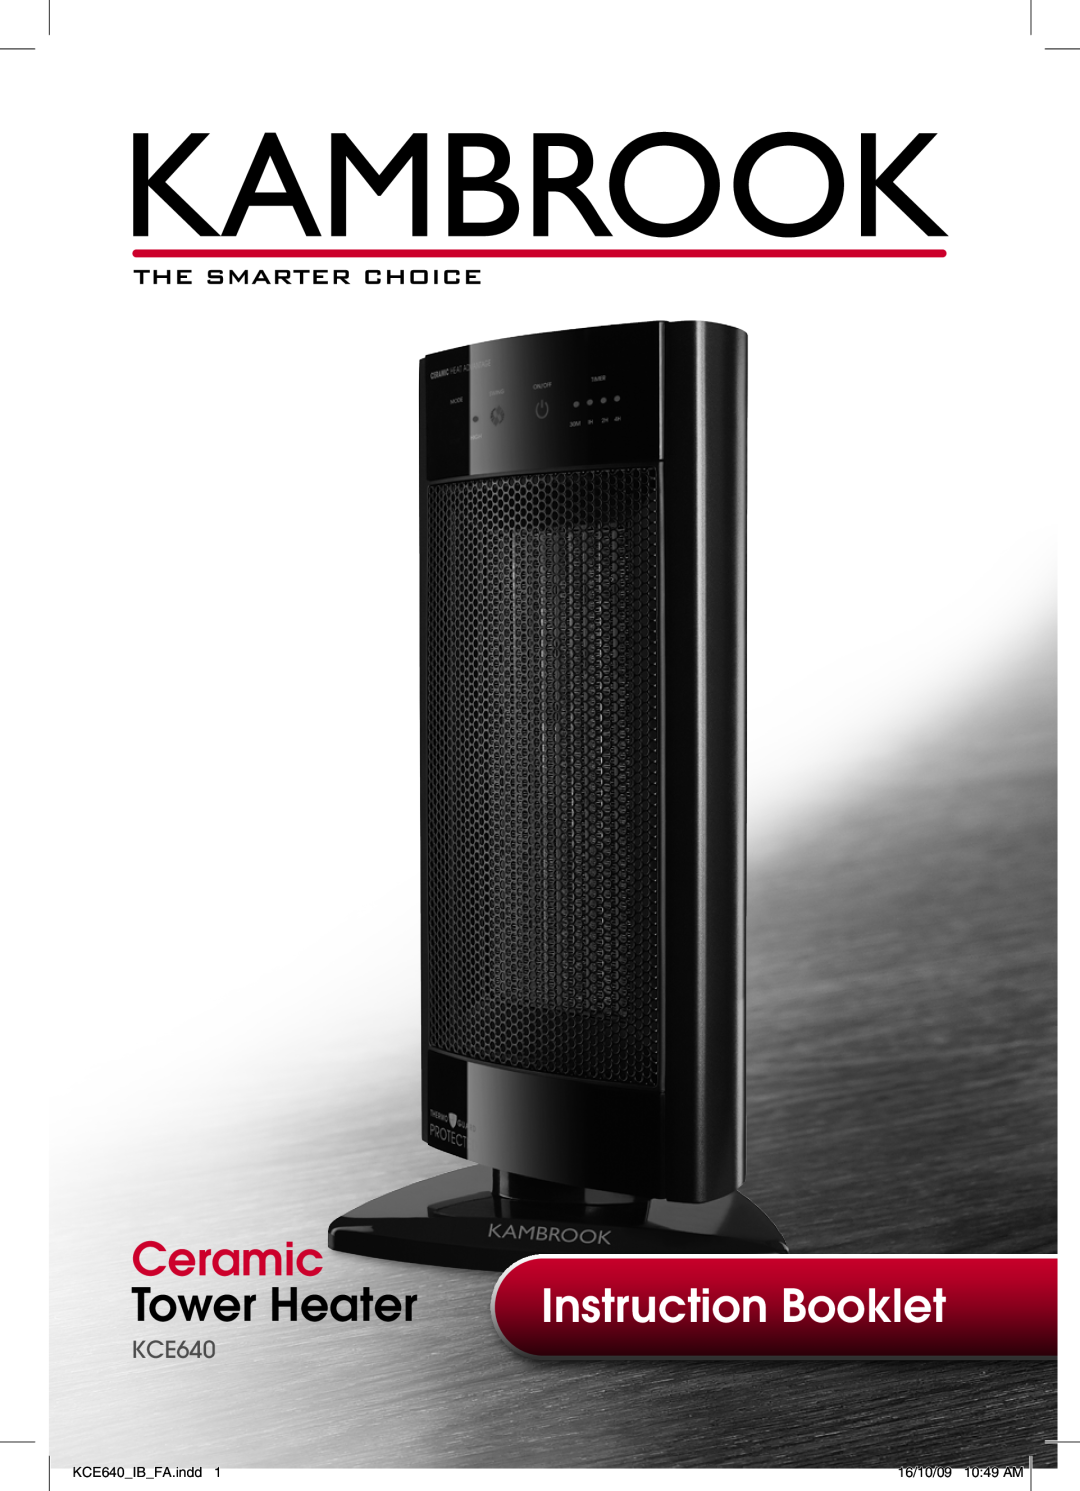 Kambrook manual Ceramic, Tower Heater, Instruction Booklet, KCE640 IB FA.indd, 16/10/09 10 49 AM 